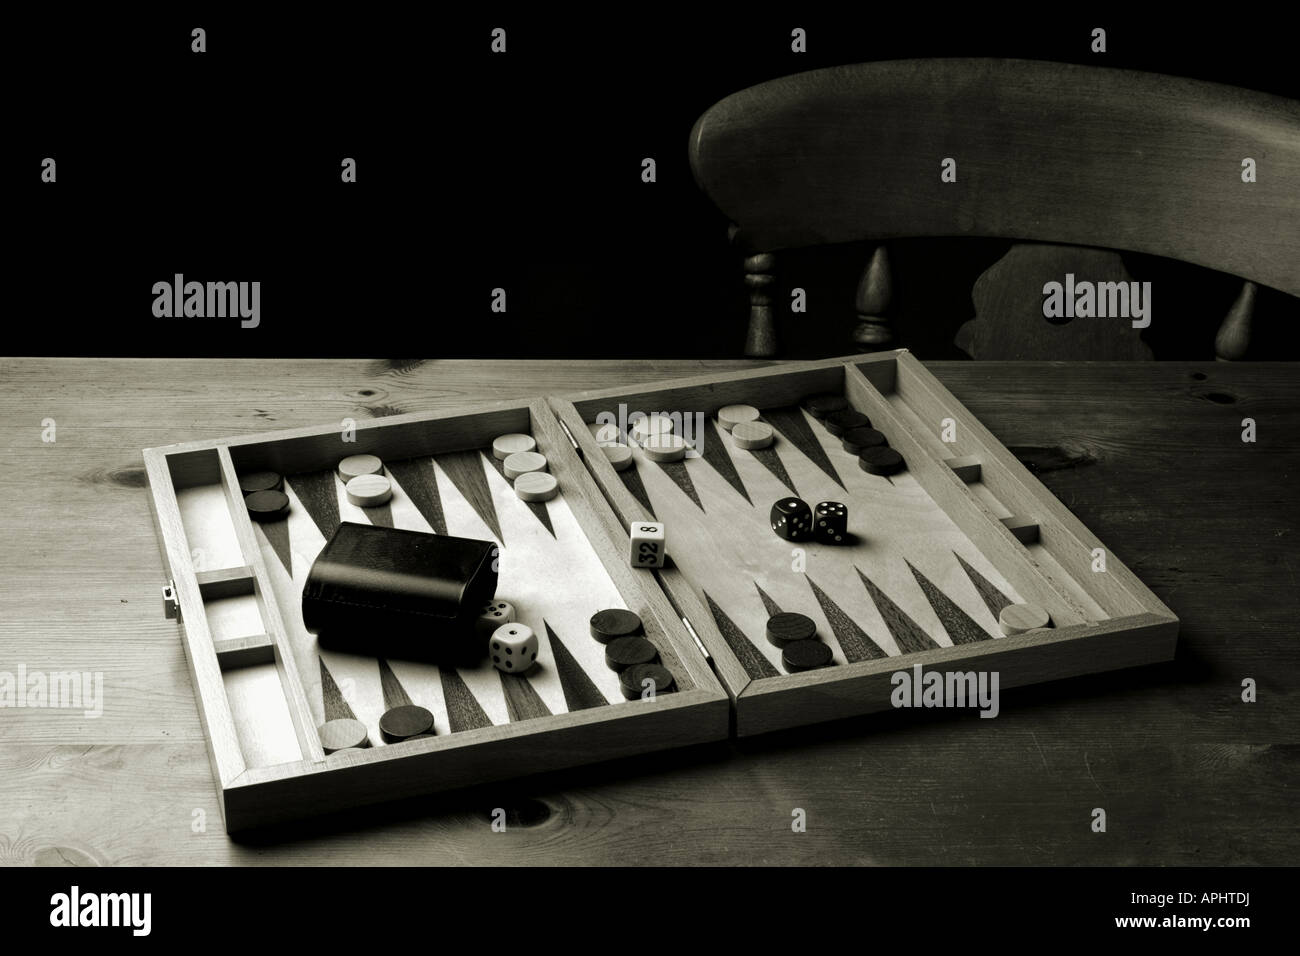 Backgammon set laid out ready for a game on a wooden table with a wooden chair in the background Stock Photo